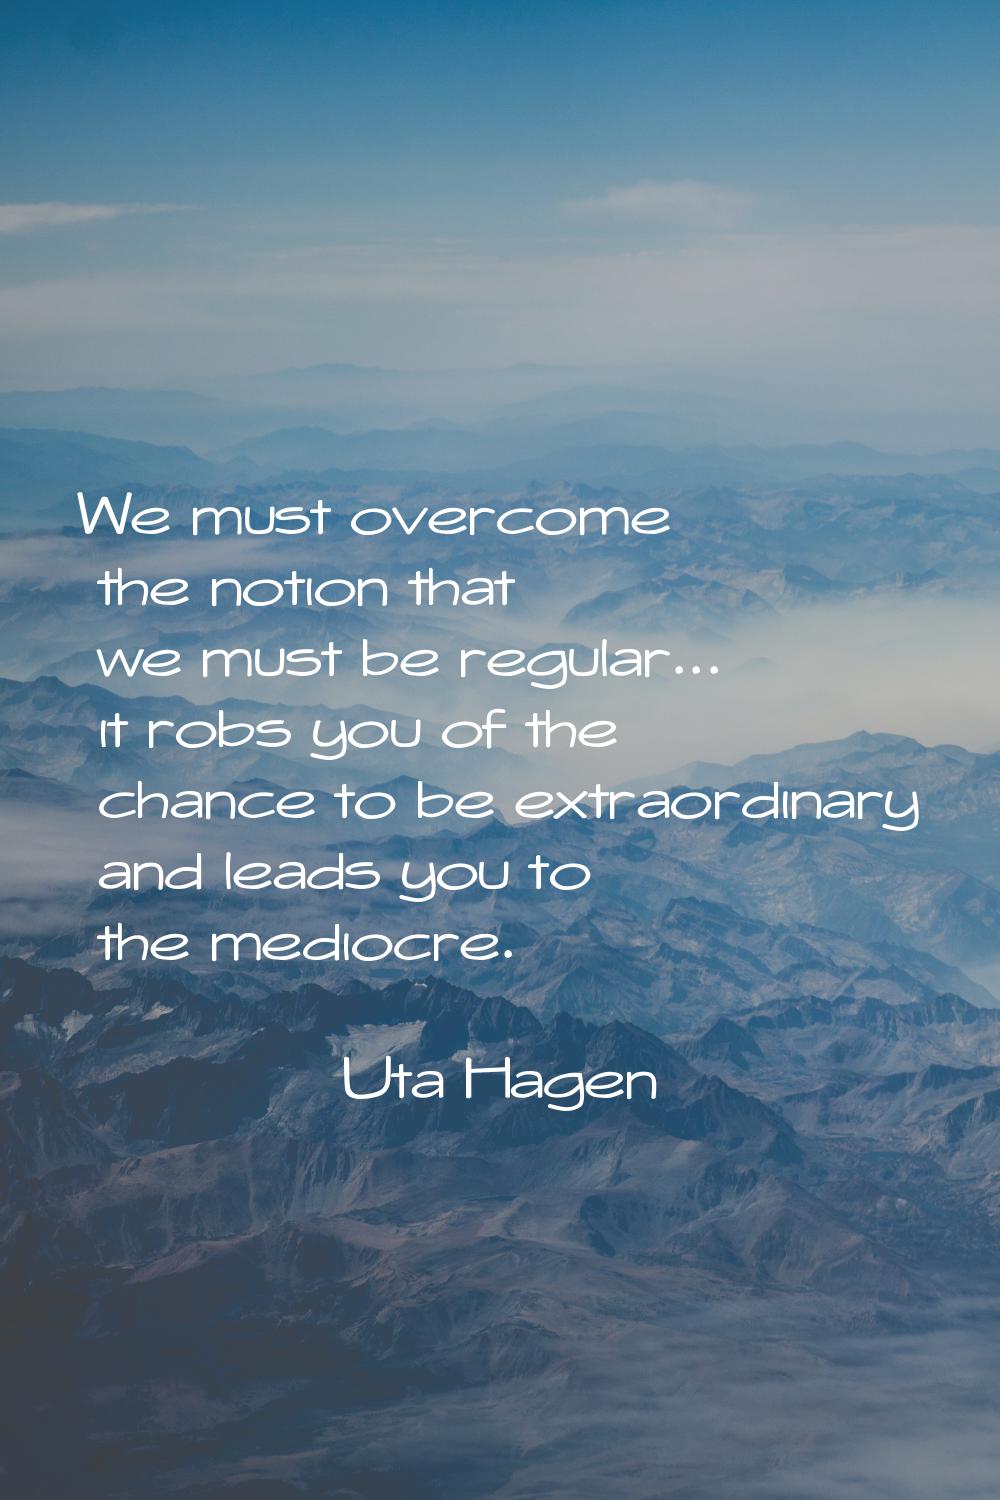 We must overcome the notion that we must be regular... it robs you of the chance to be extraordinar